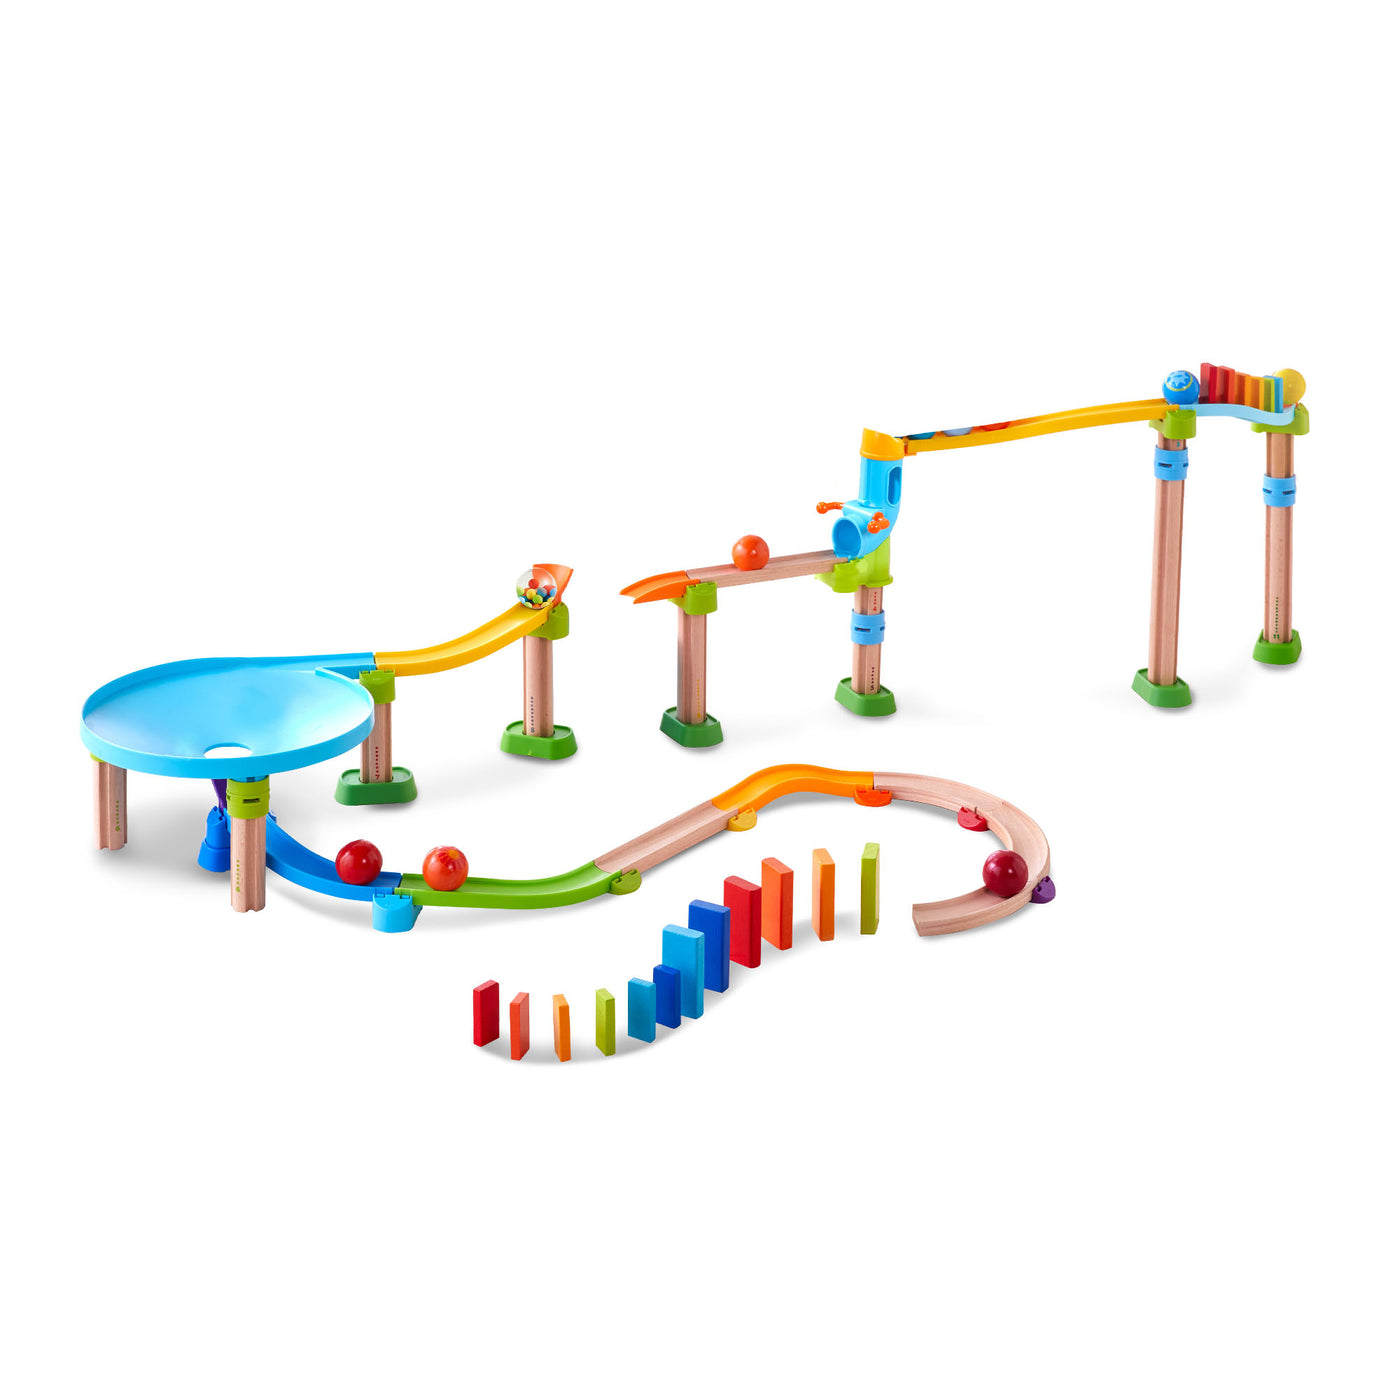 Kullerbu Rainbow Run Bundle with dominoes, 7 balls, a funnel circle, and multi colored track